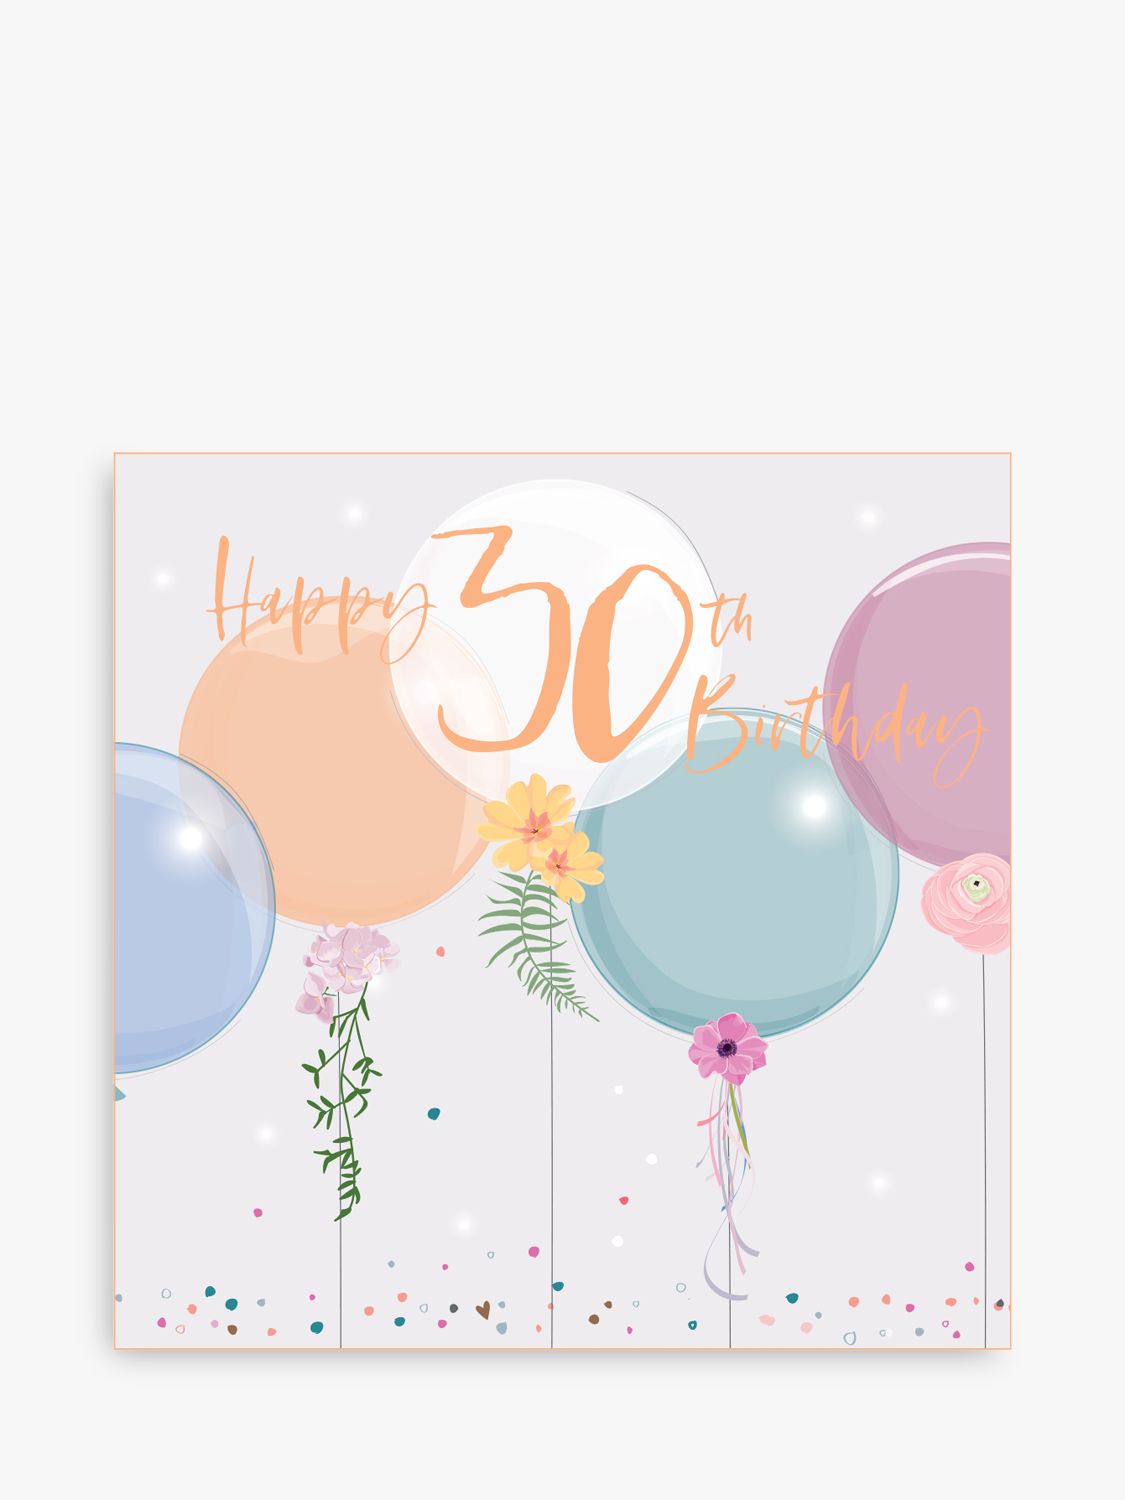 Belly Button Designs Balloons 30th Birthday Card